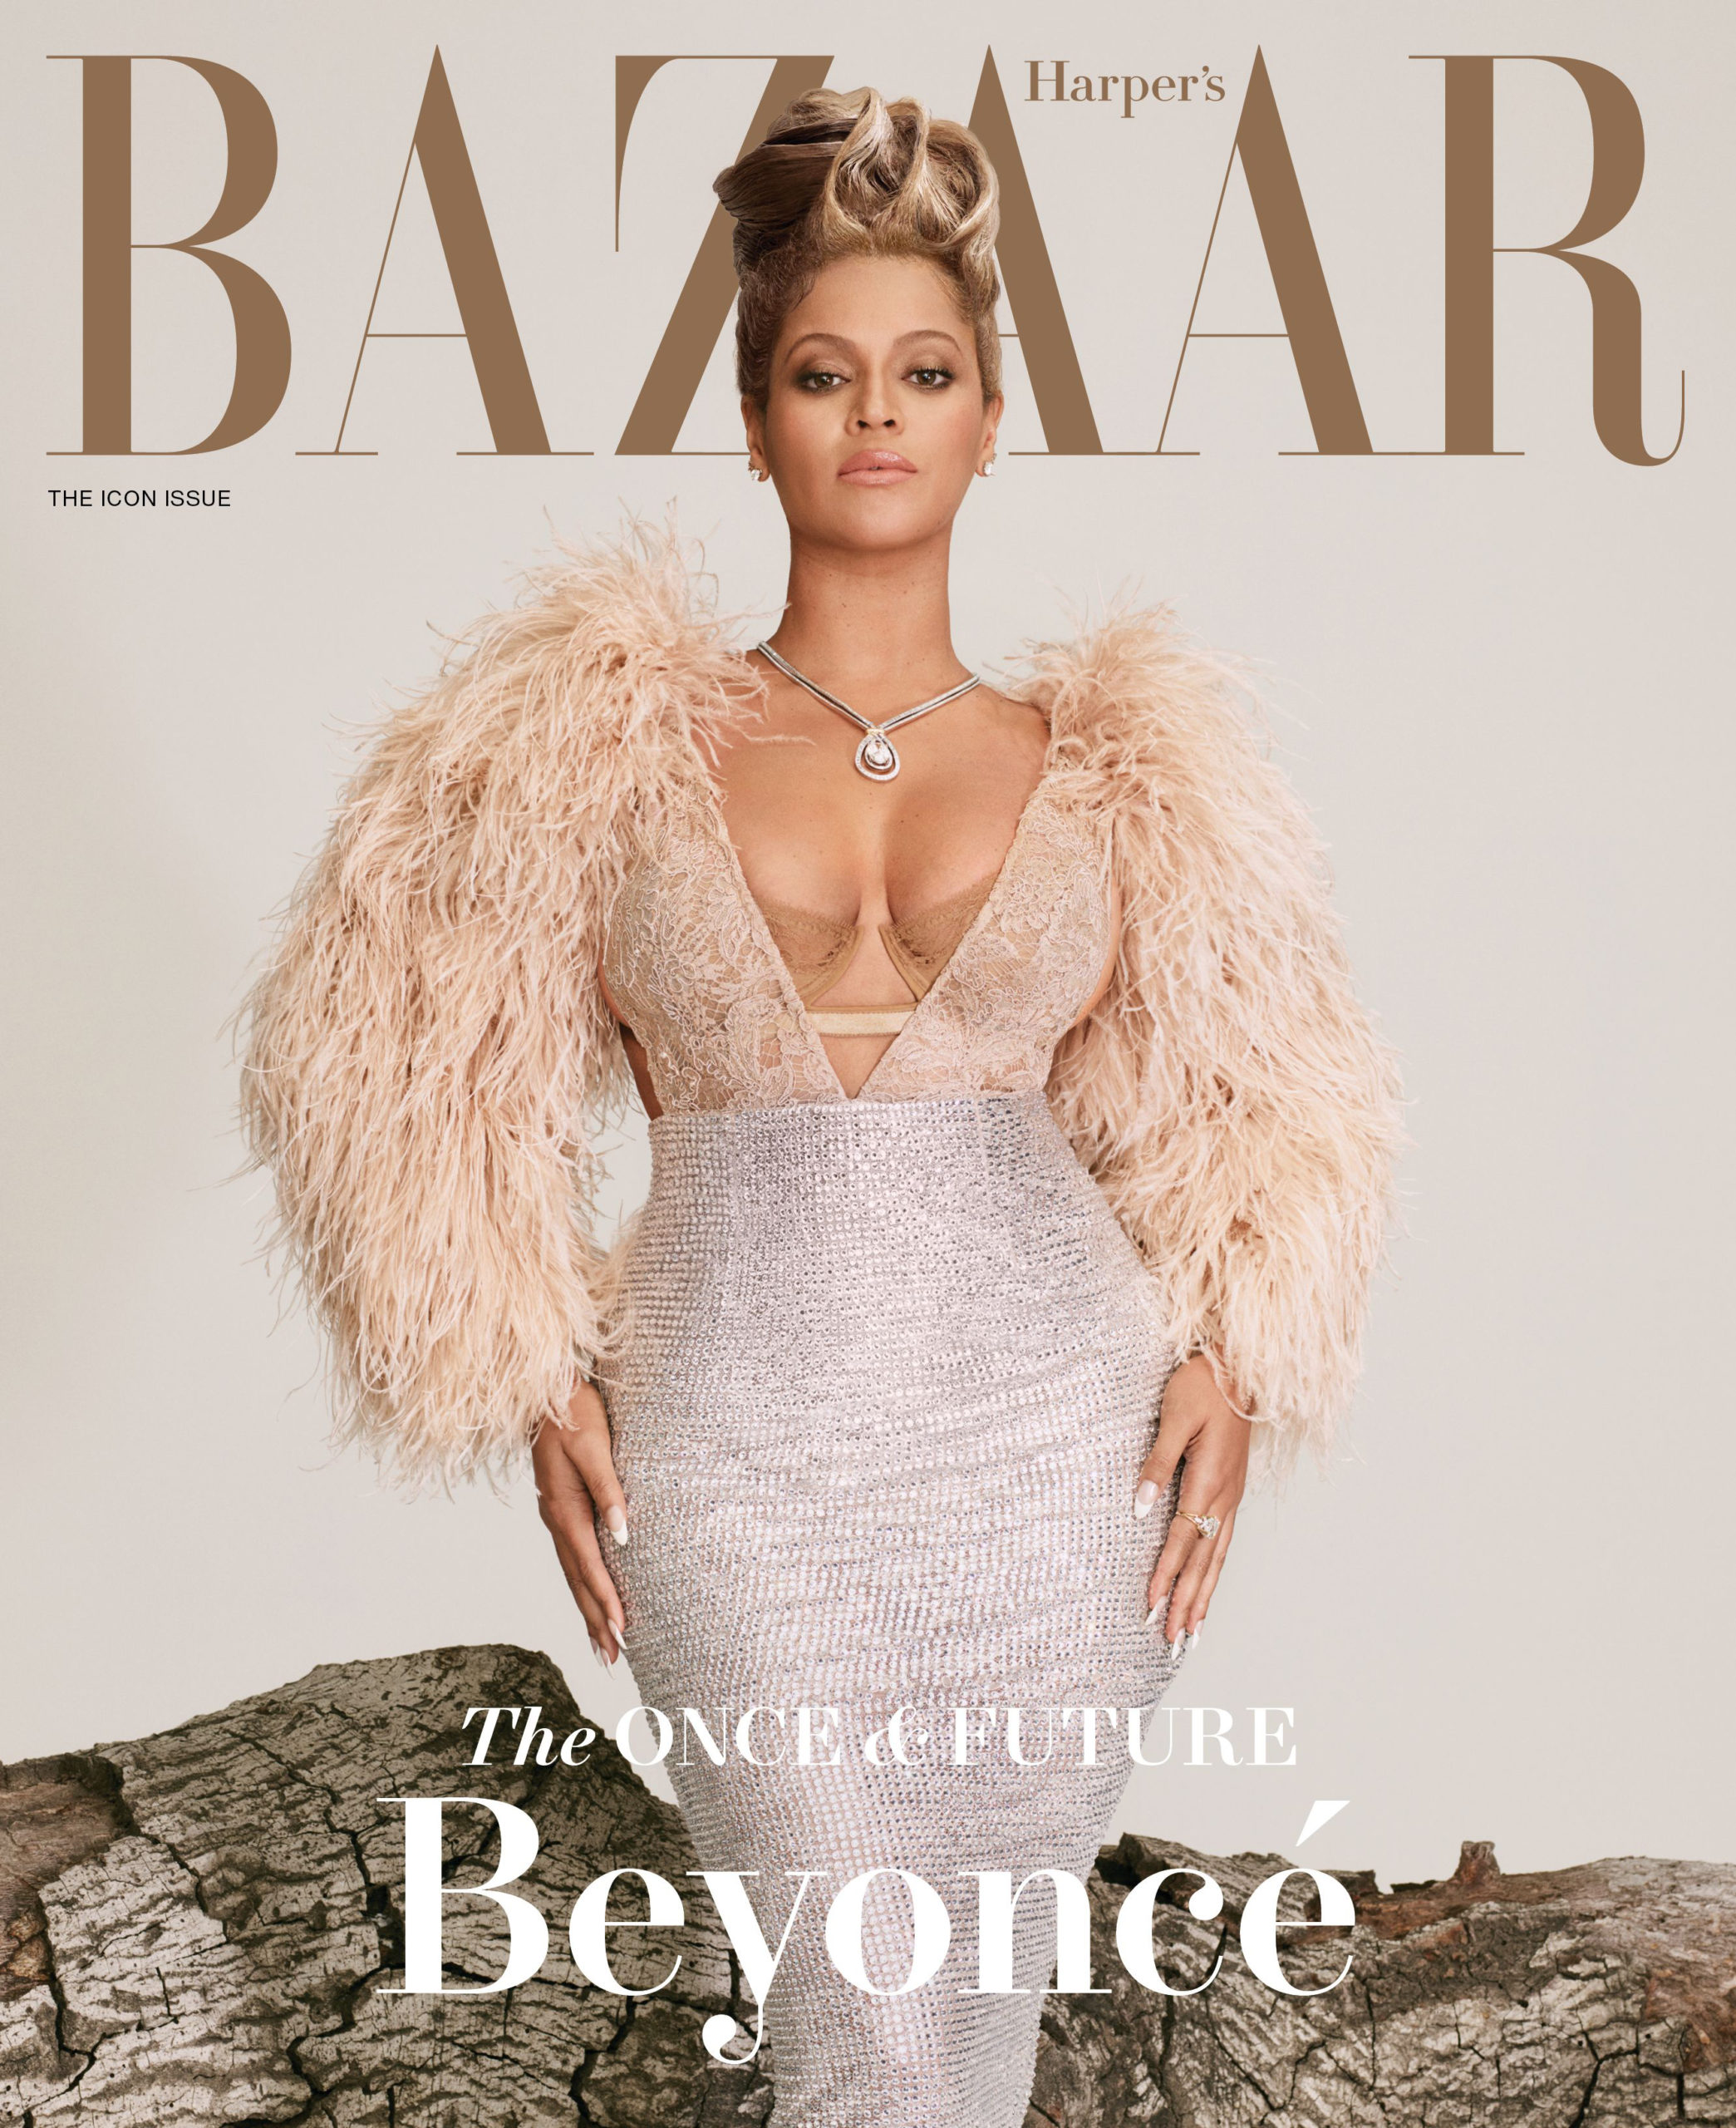 Beyoncé covers Harper’s Bazaar US September 2021 by Campbell Addy